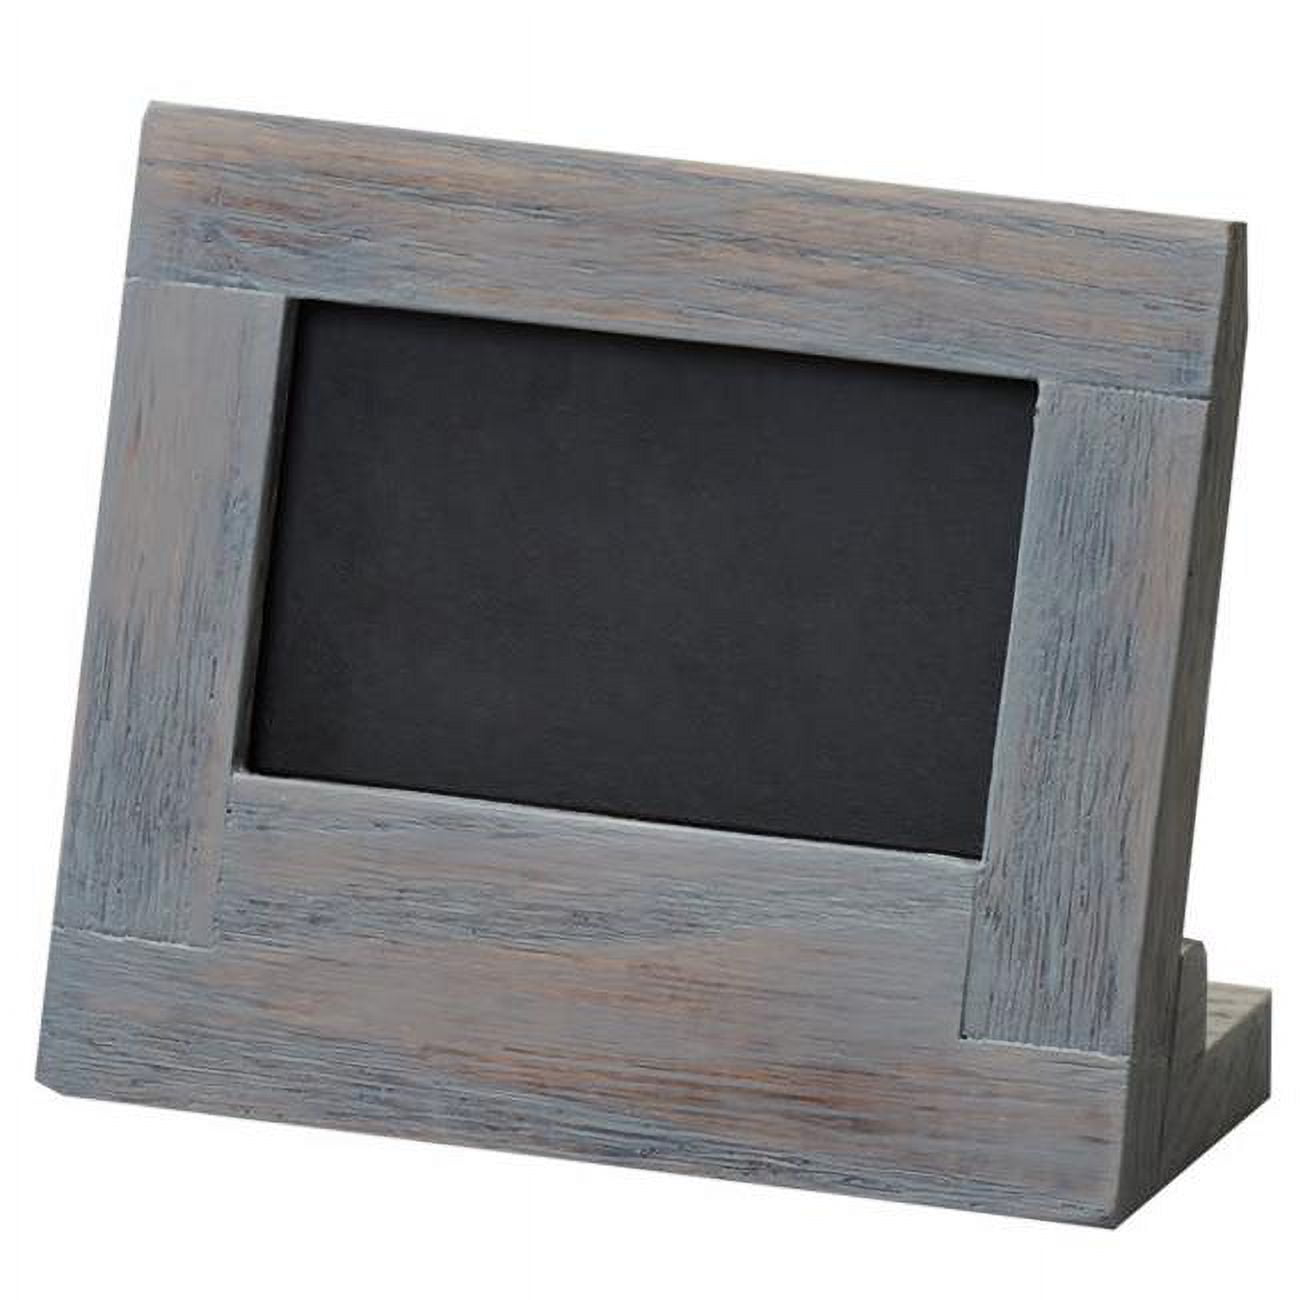 Picture of Cal Mil 3818-23-83 Ashwood Chalkboard Stand - 5 x 2.5 x 4.5 in.